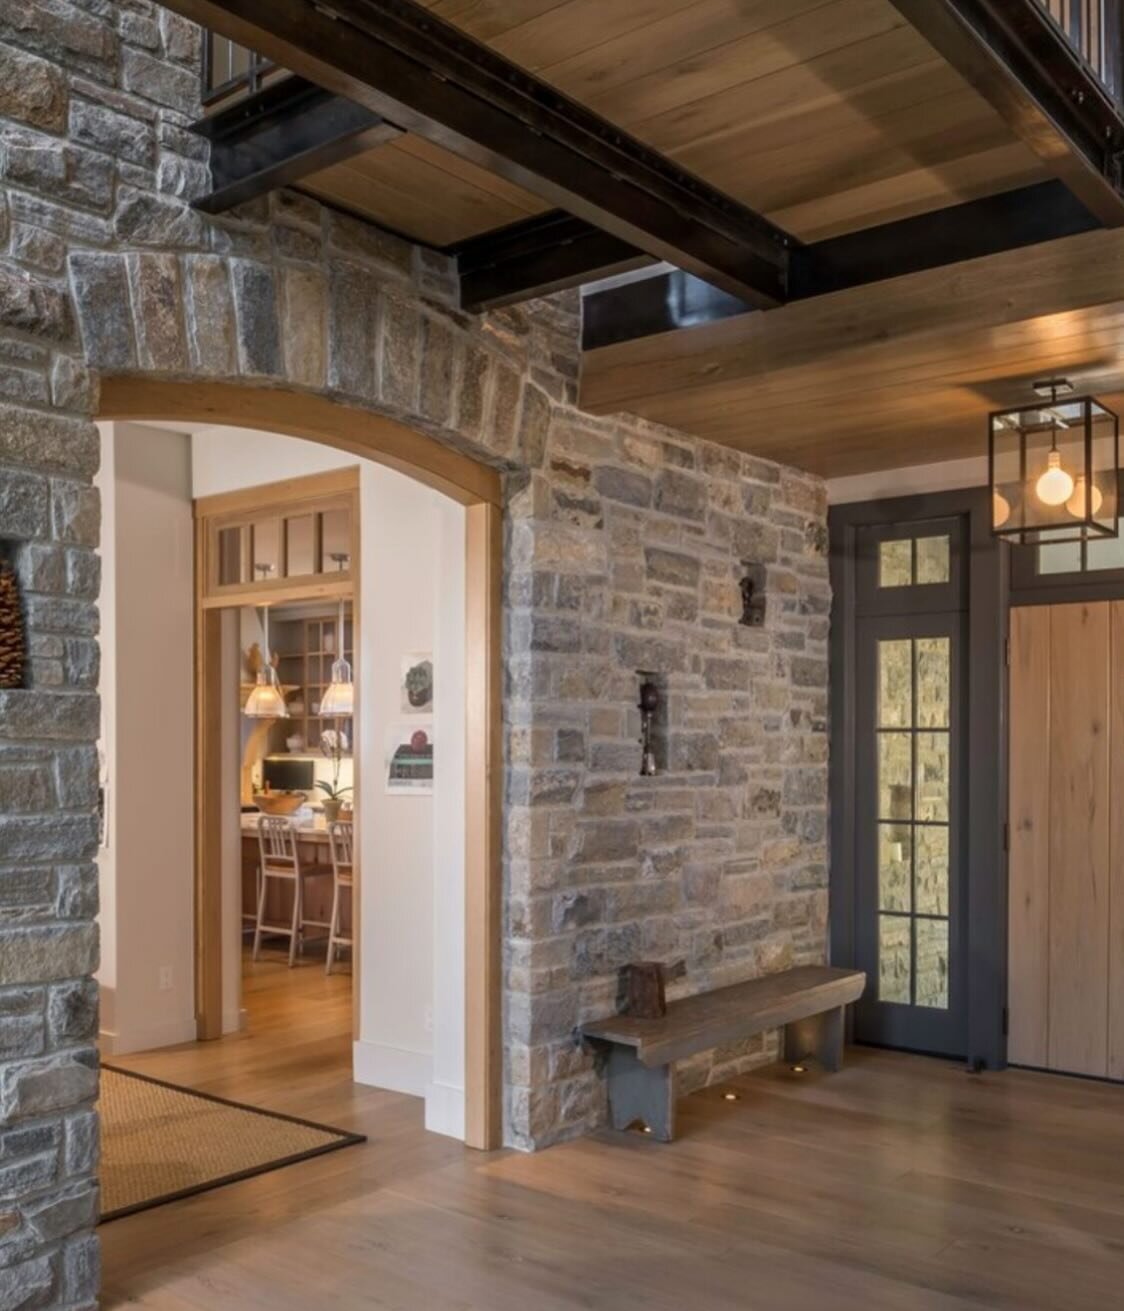 connecting to the past

architect @mamoarch

#residentialdesign #stonehomes #residentialarchitecture #modernliving #interiors #architecture #masonary #moderninteriordesign